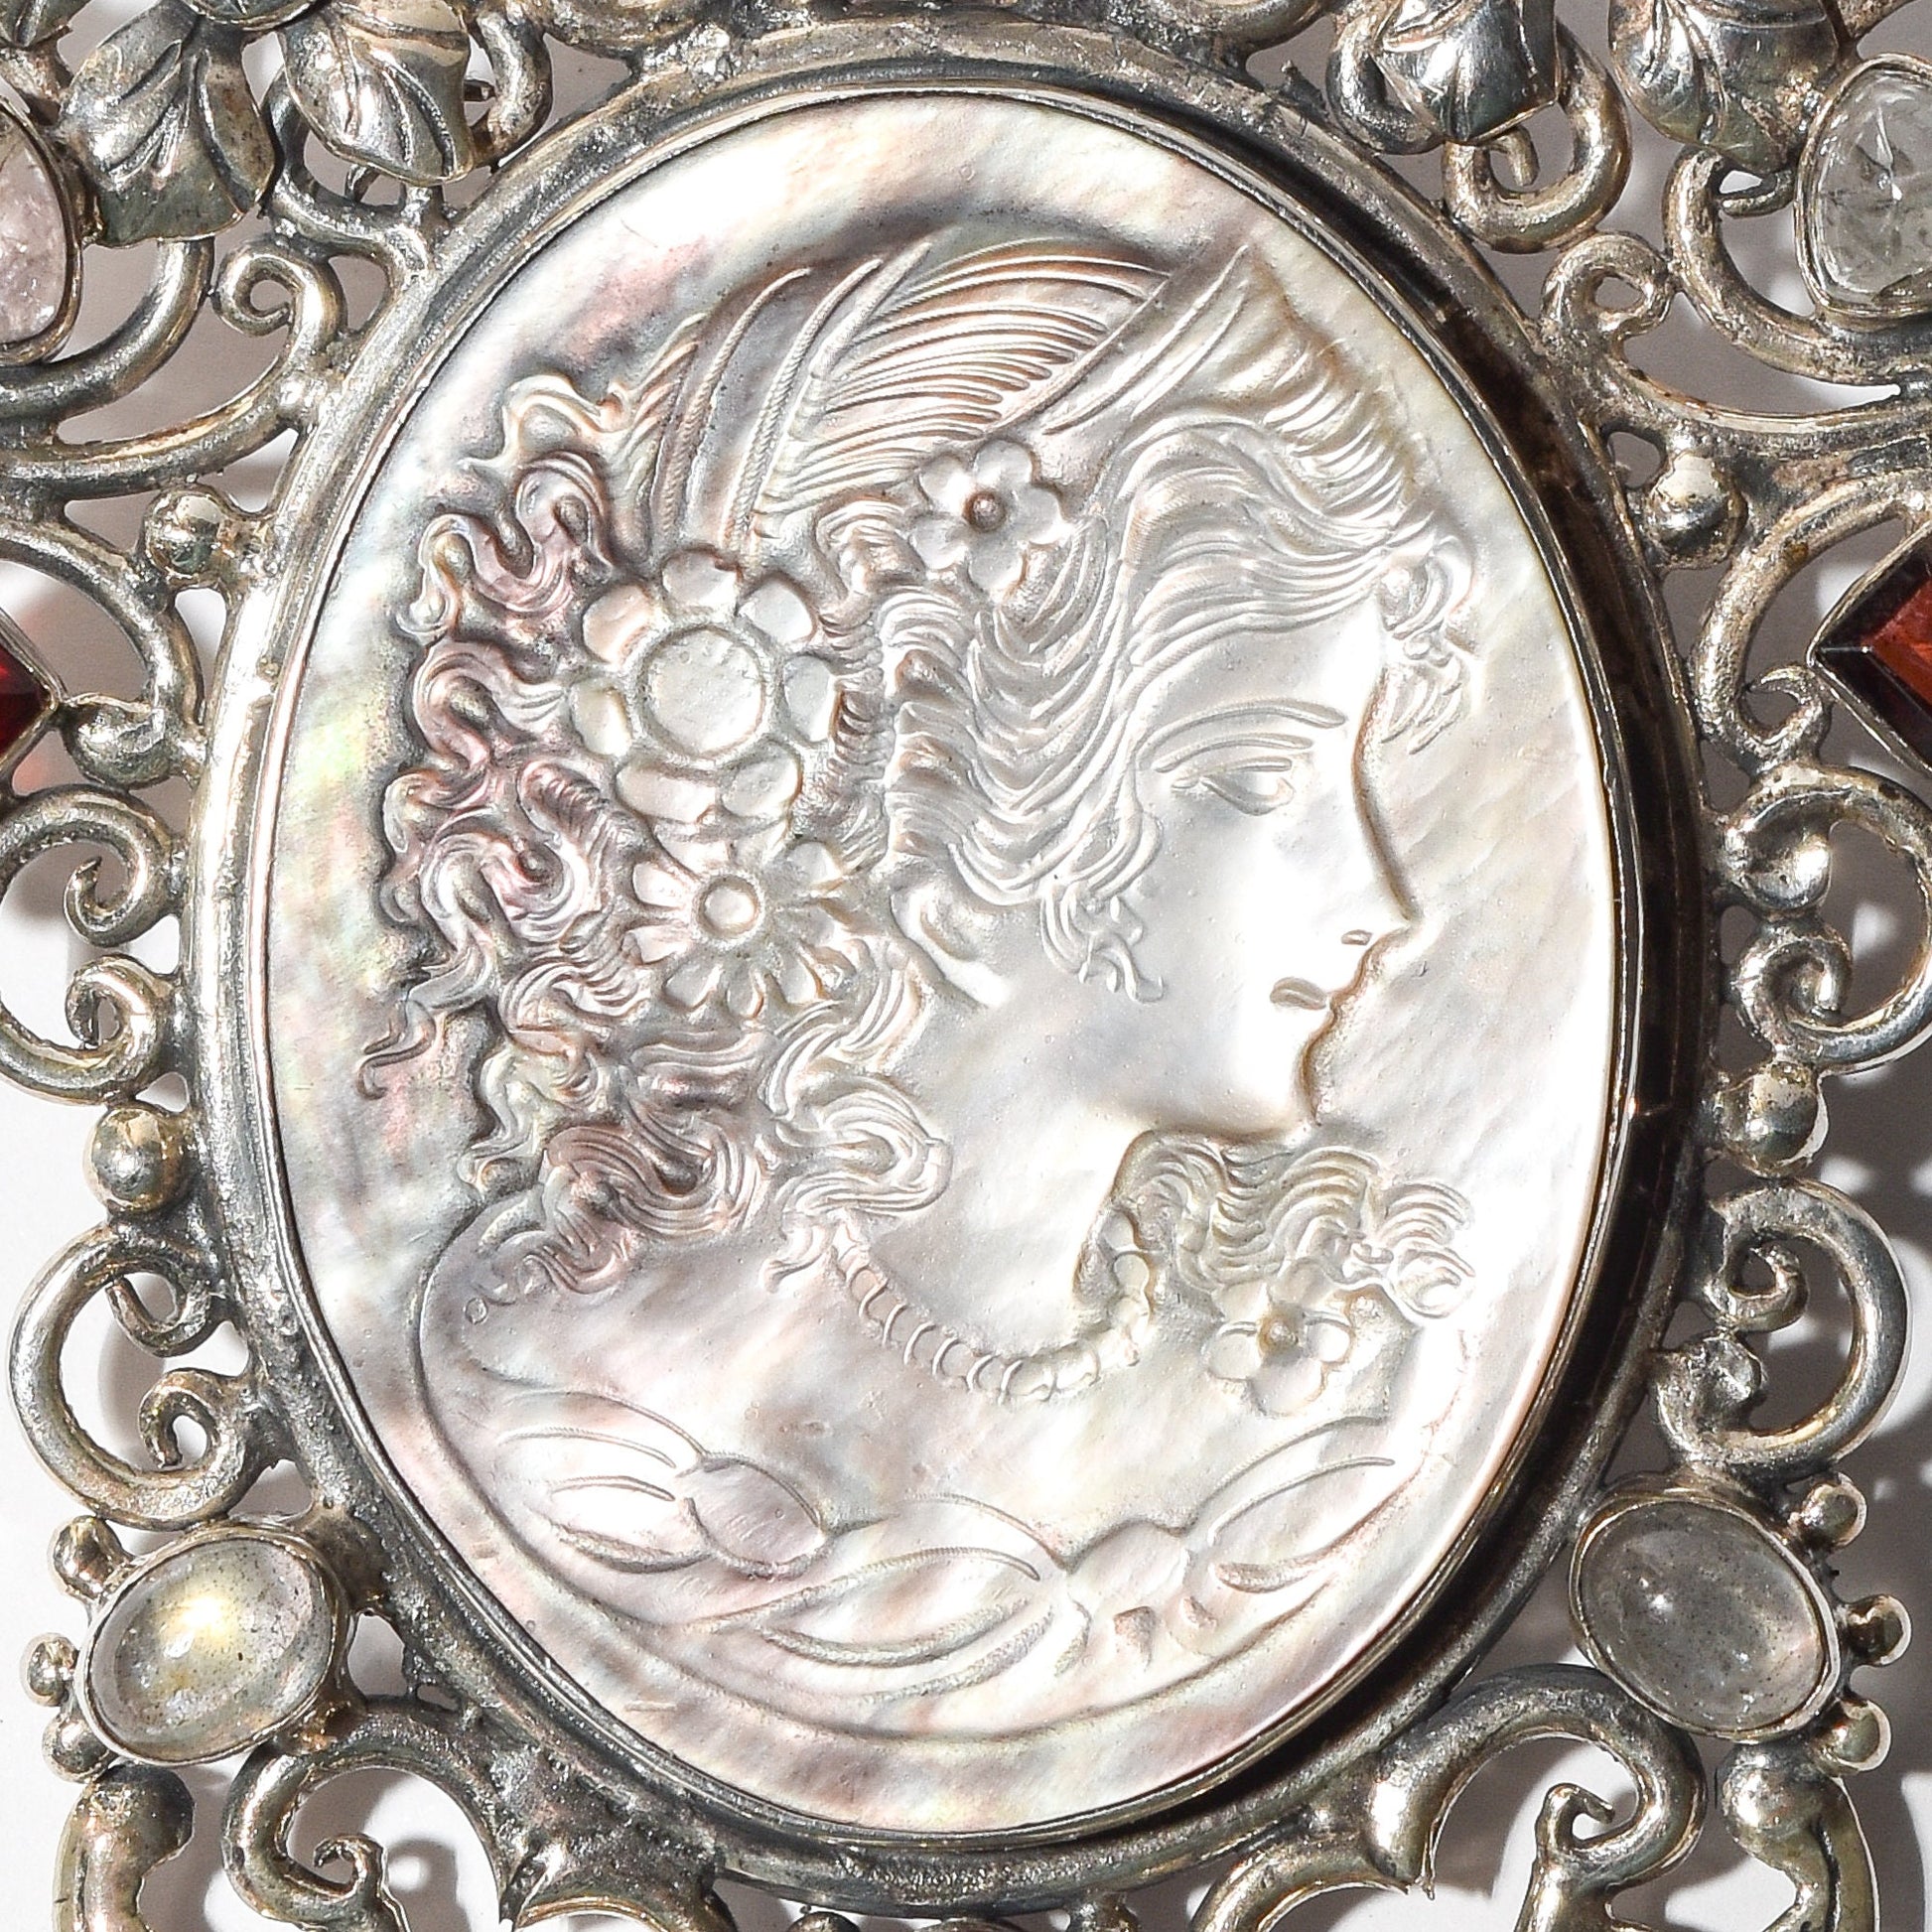 Victorian style cameo pendant brooch in sterling silver featuring a large ornate multi-stone design and a profile carving of a woman, measuring 4 inches in length.